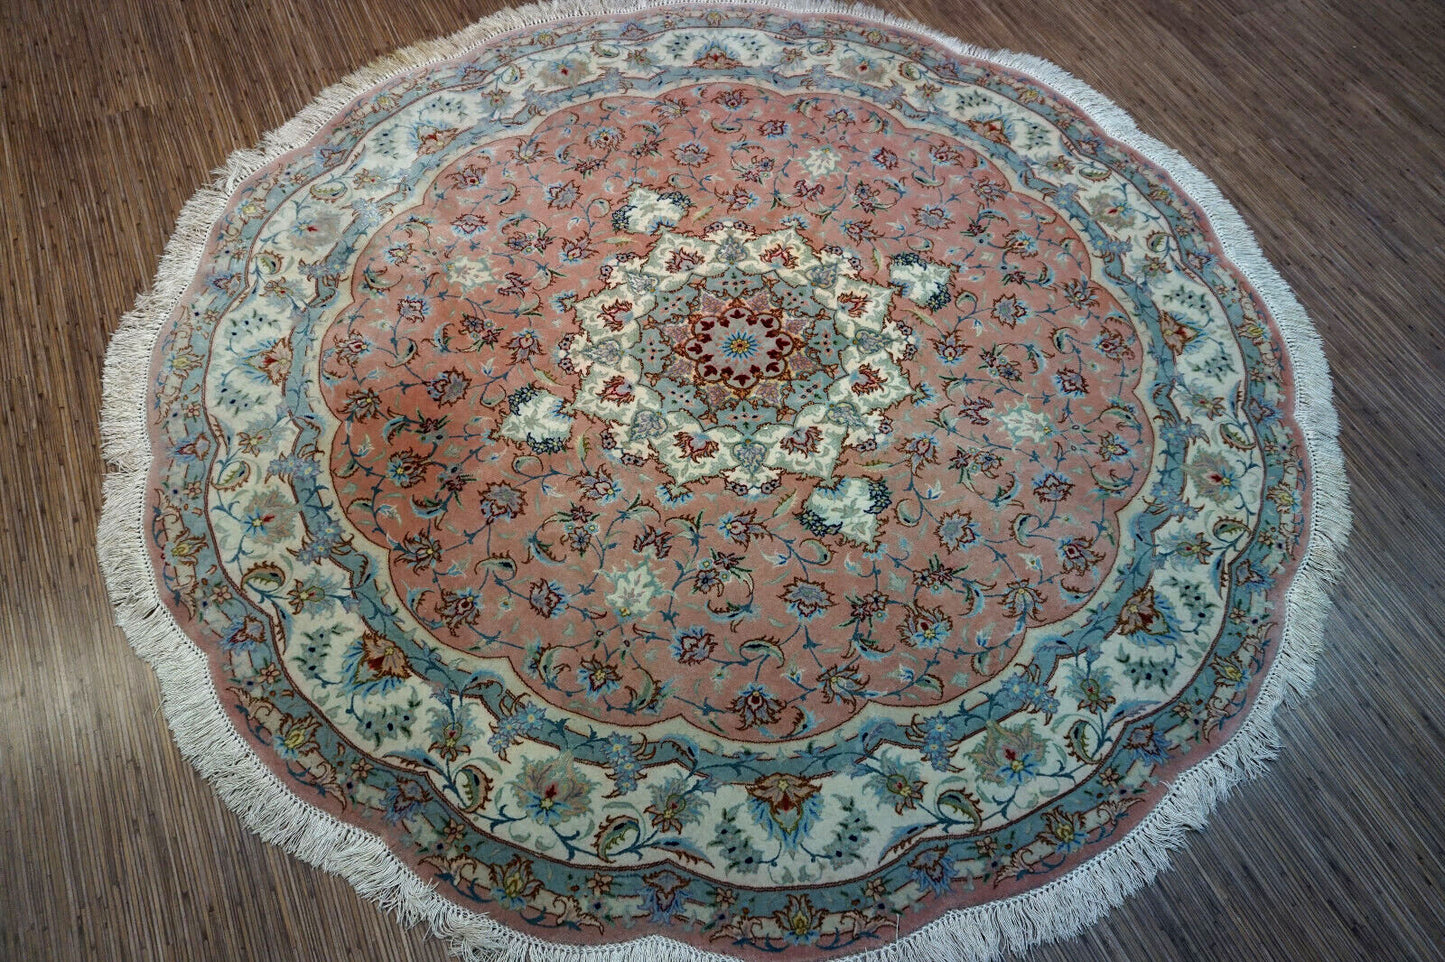 Antique Middle Eastern Round Rug